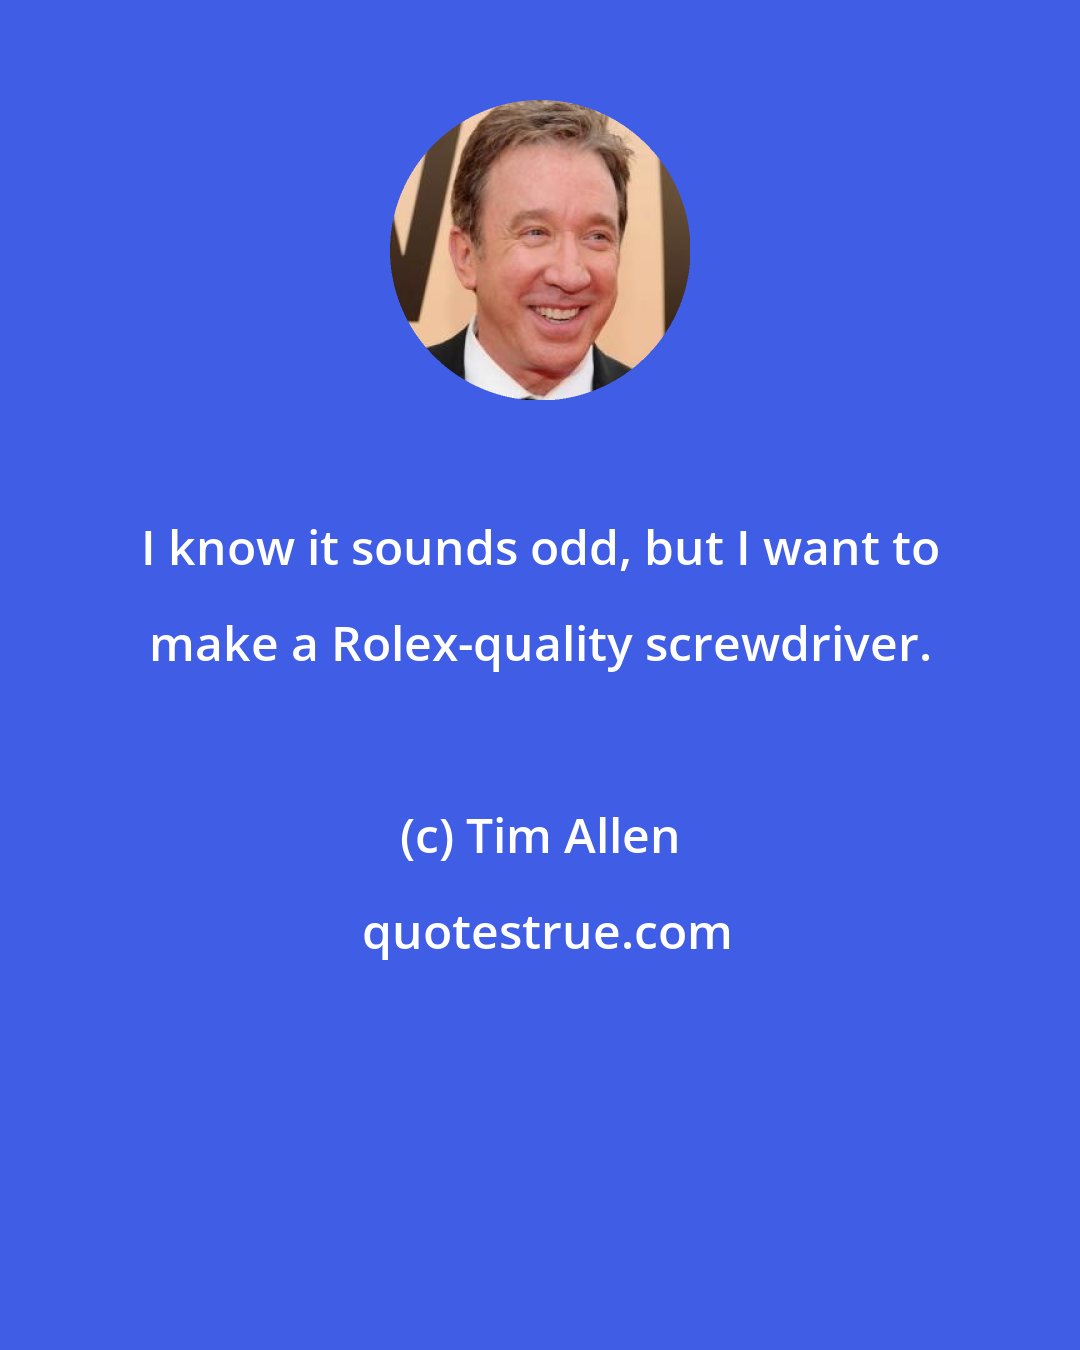 Tim Allen: I know it sounds odd, but I want to make a Rolex-quality screwdriver.